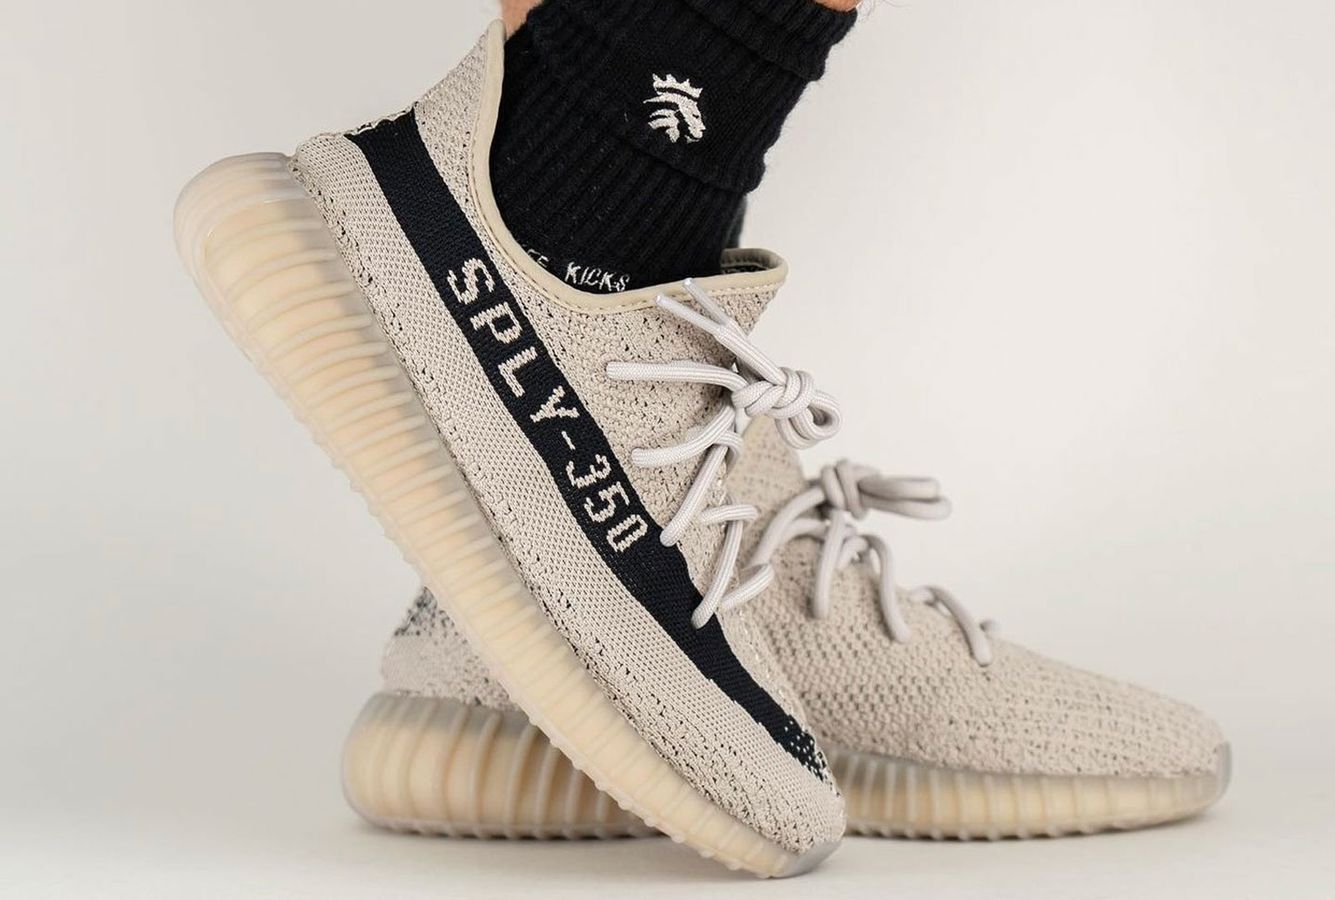 When Is The adidas Yeezy Boost 350 v2 Reverse Oreo Release Date? Here's ...